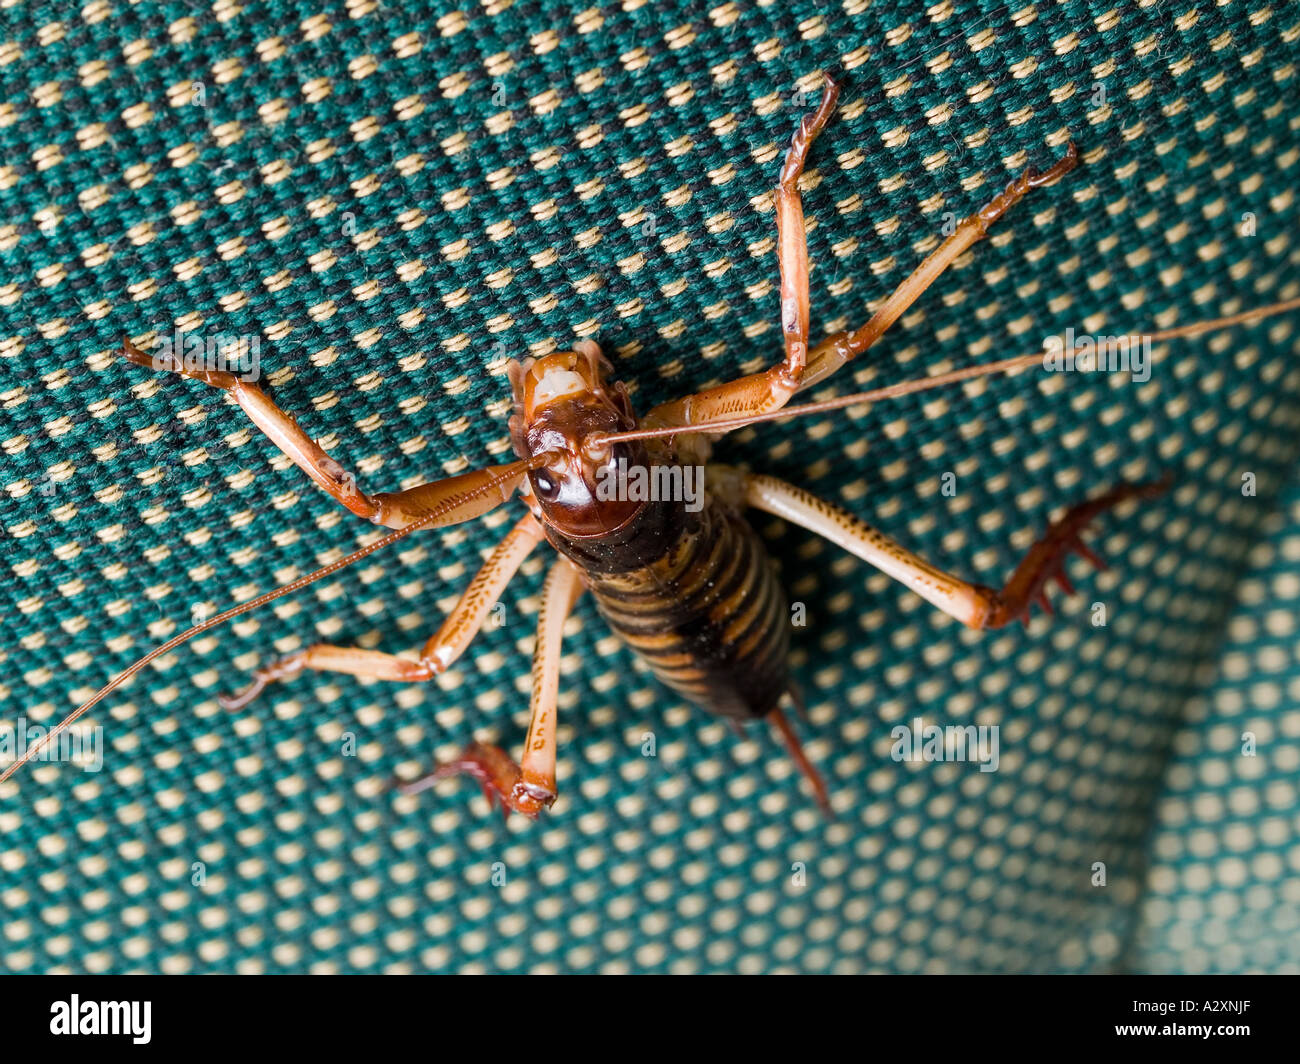 This weta an exotic insect related to grasshoppers crickets and locusts clings to the back of this chair Stock Photo